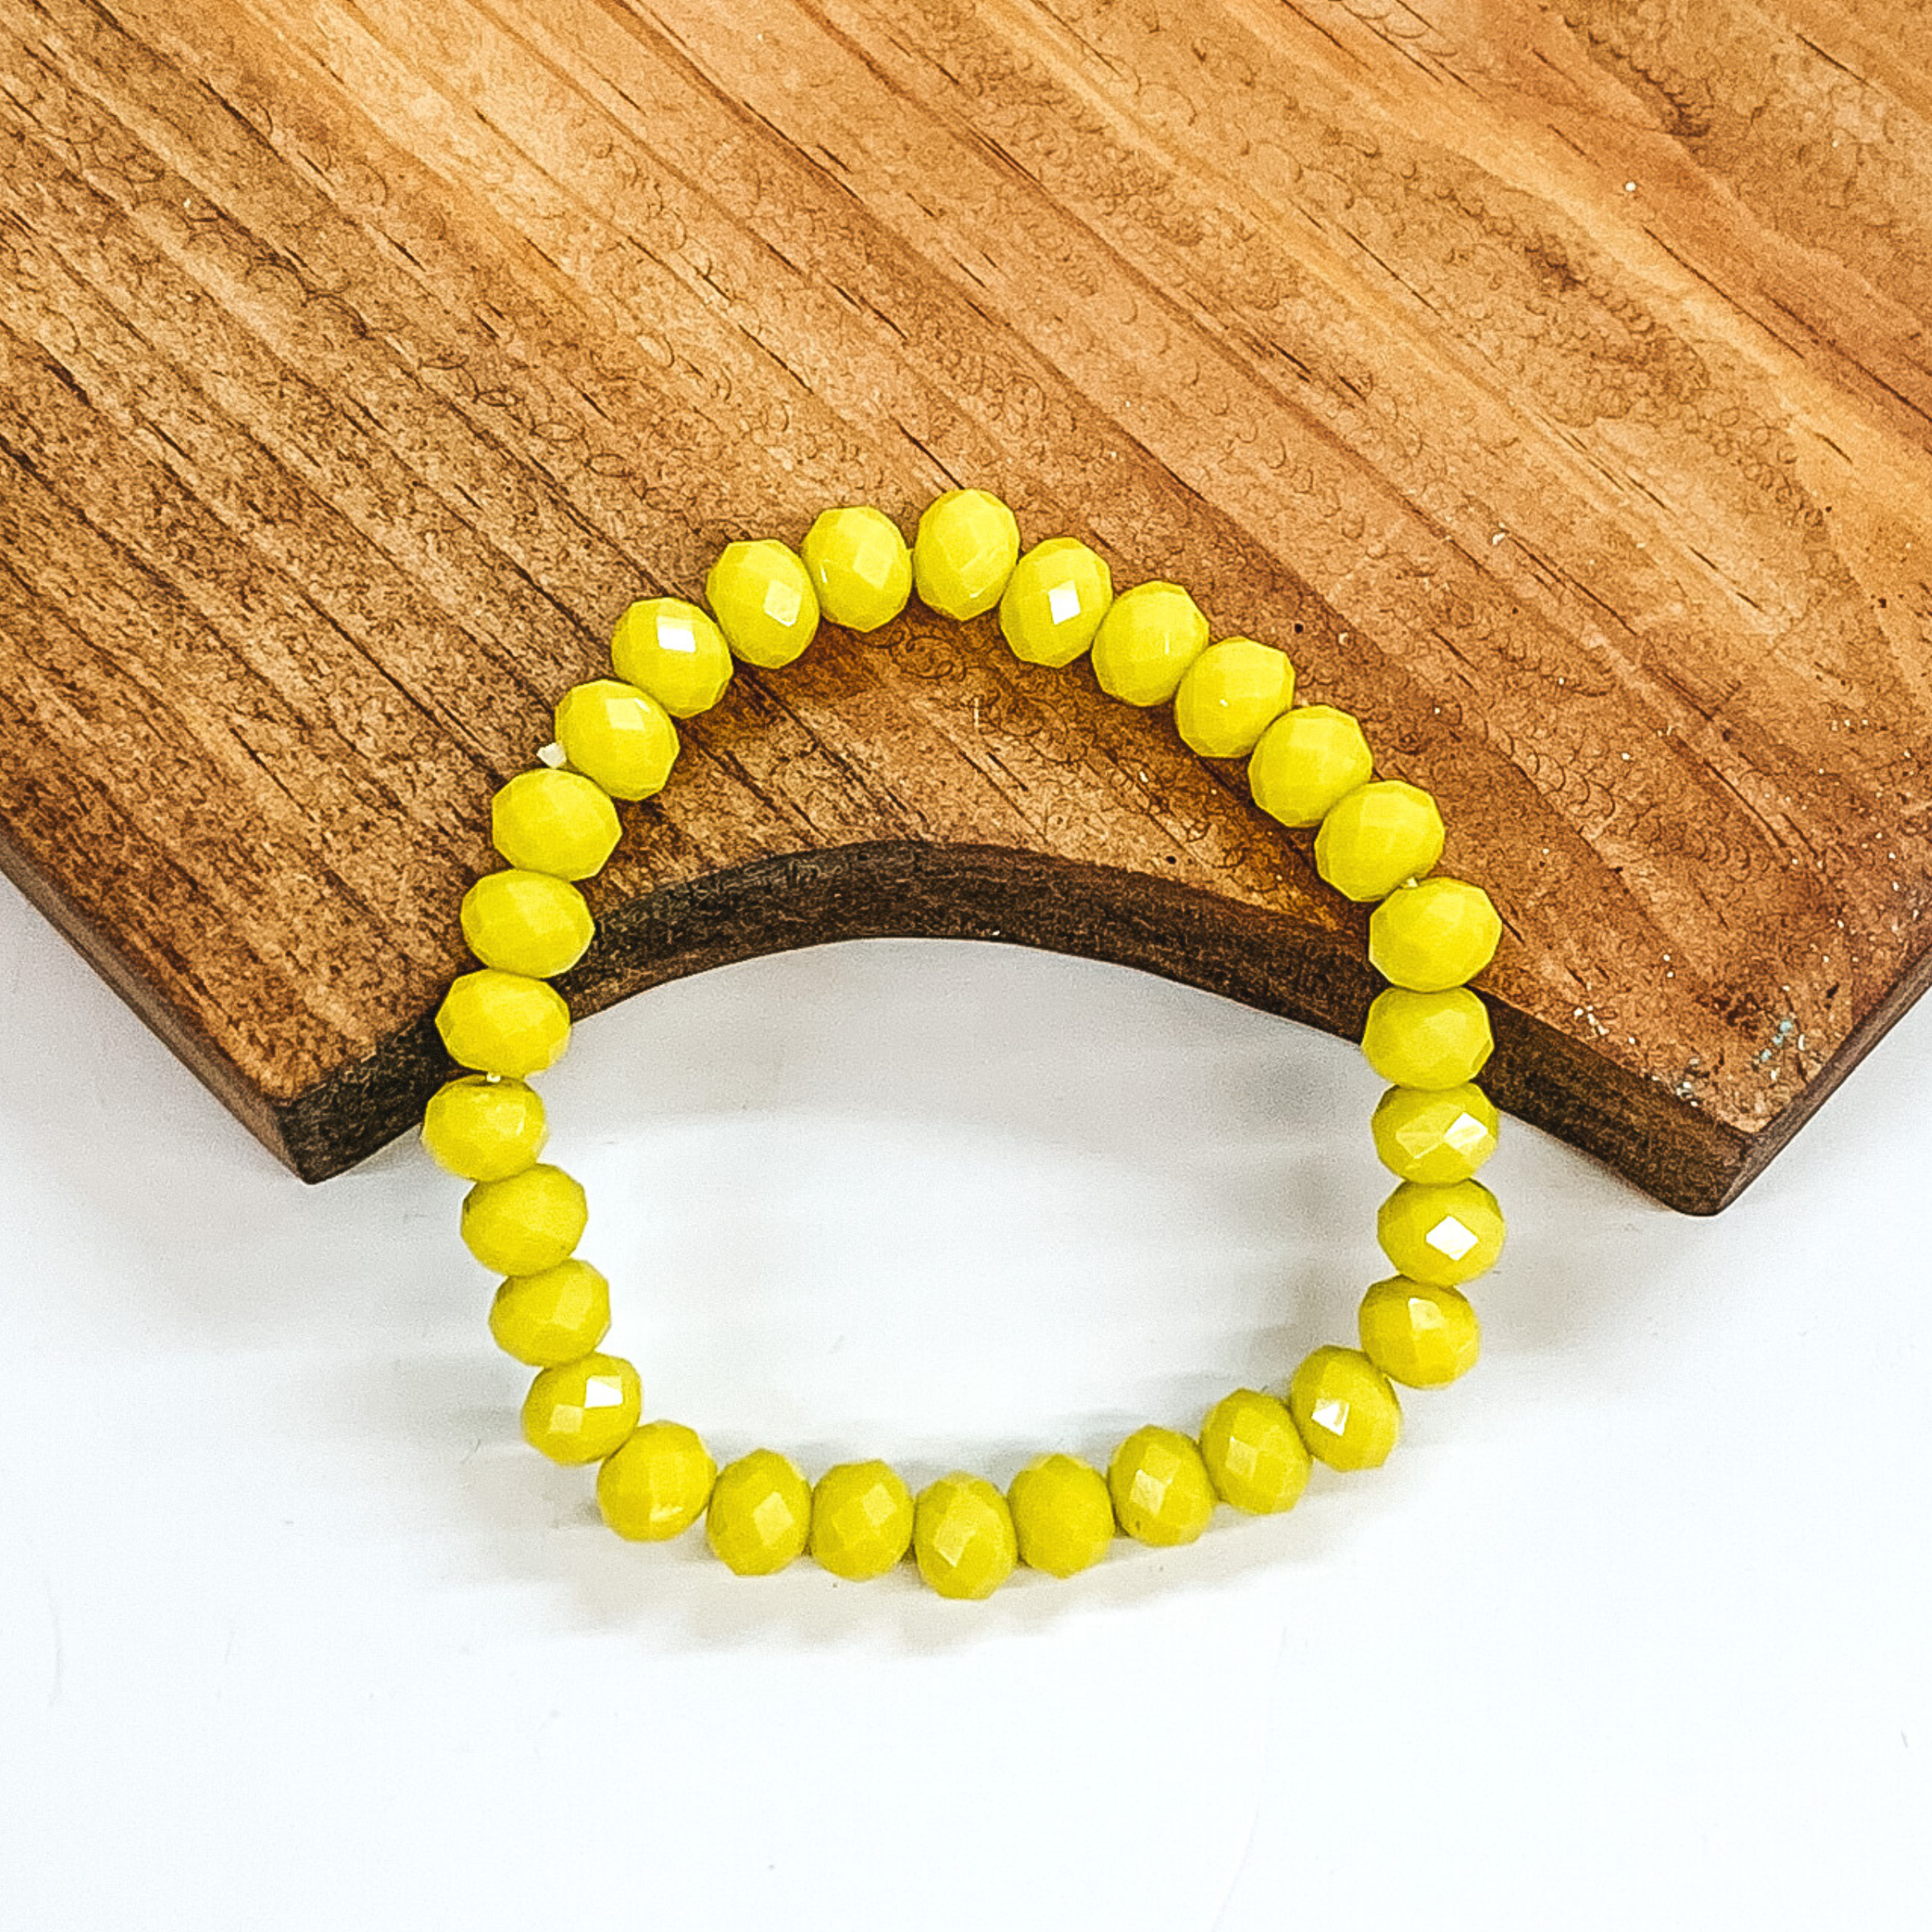 Crystal beaded bracelet in yellow. These earrings are pictured on a partially laying on a brown block on a white background.